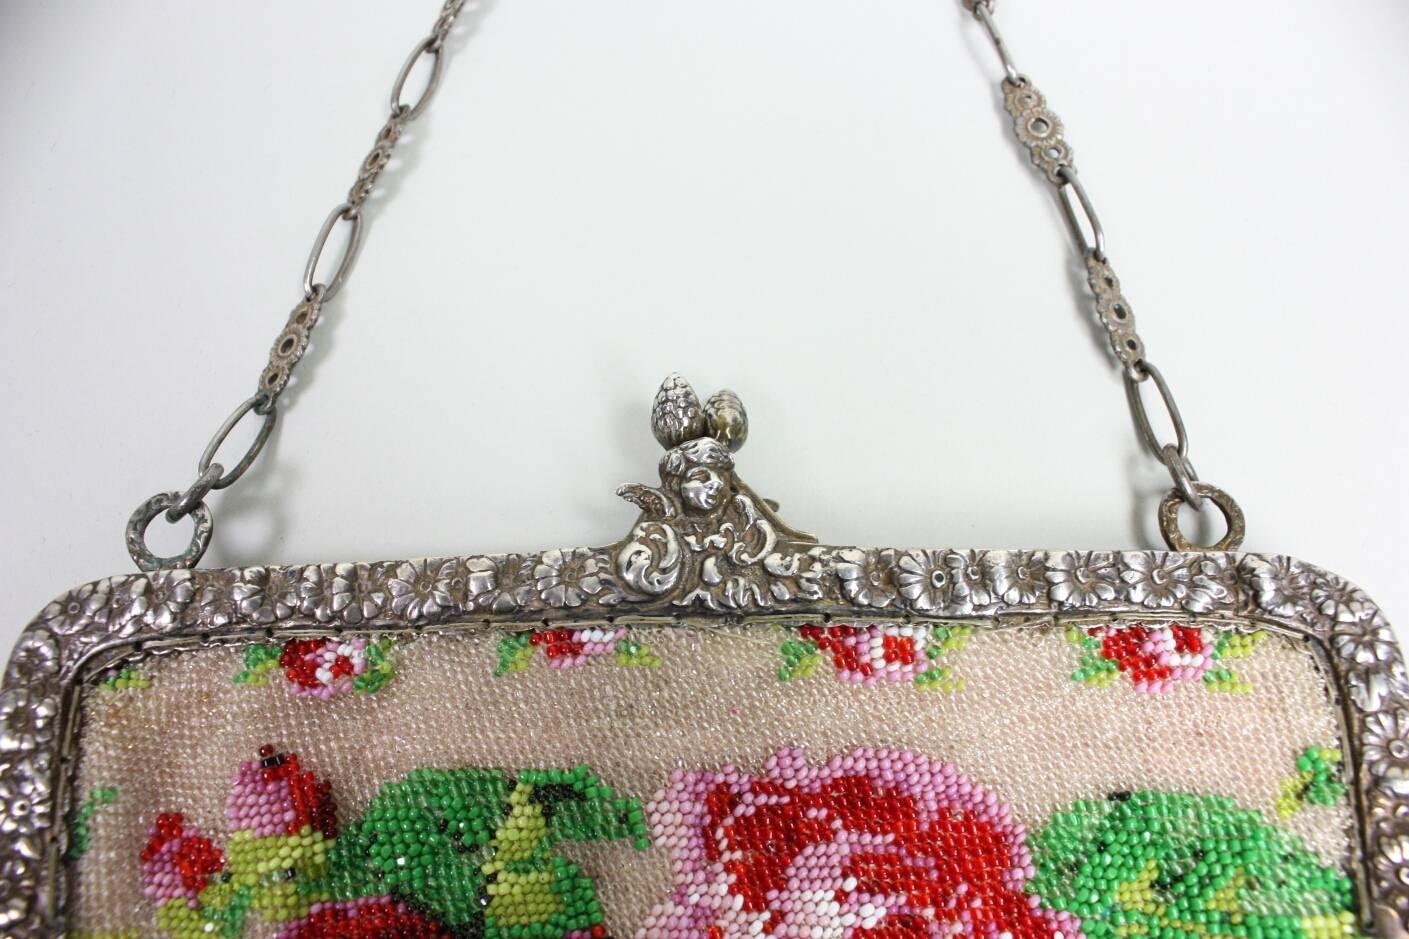 1920's Beaded Handbag with Silver Frame In Excellent Condition For Sale In Los Angeles, CA